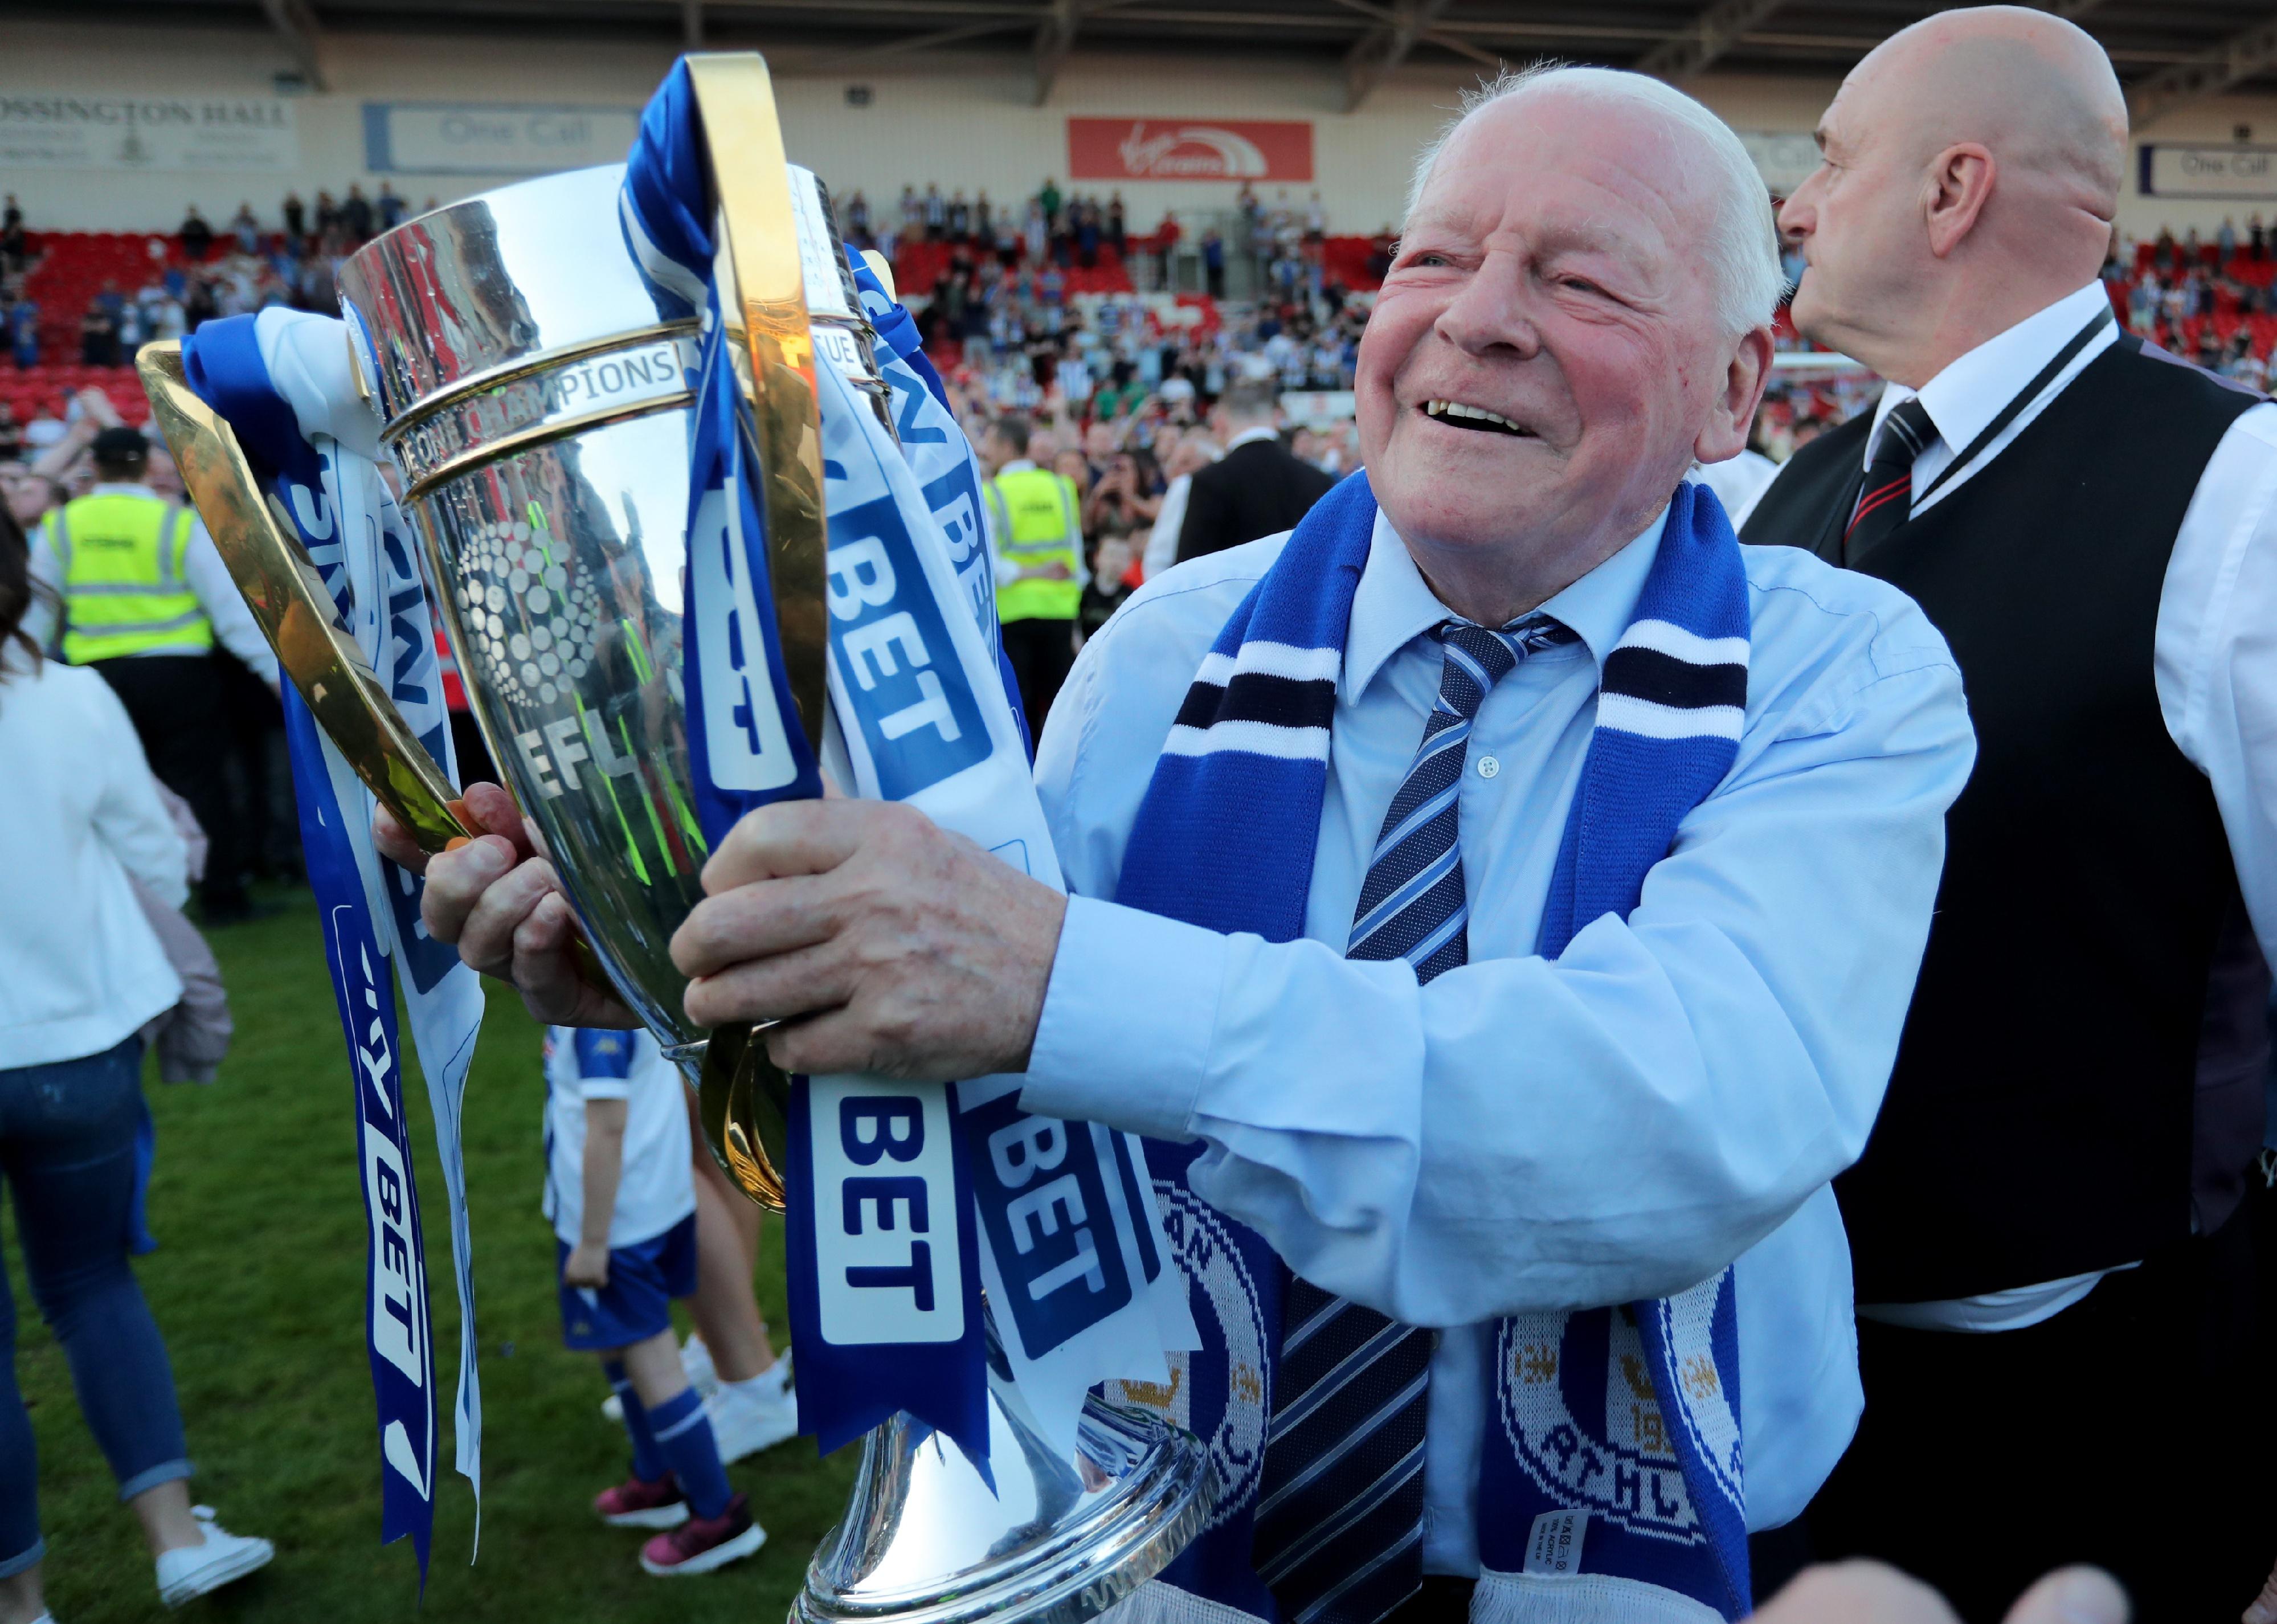 Dave Whelan after a win with a trophy